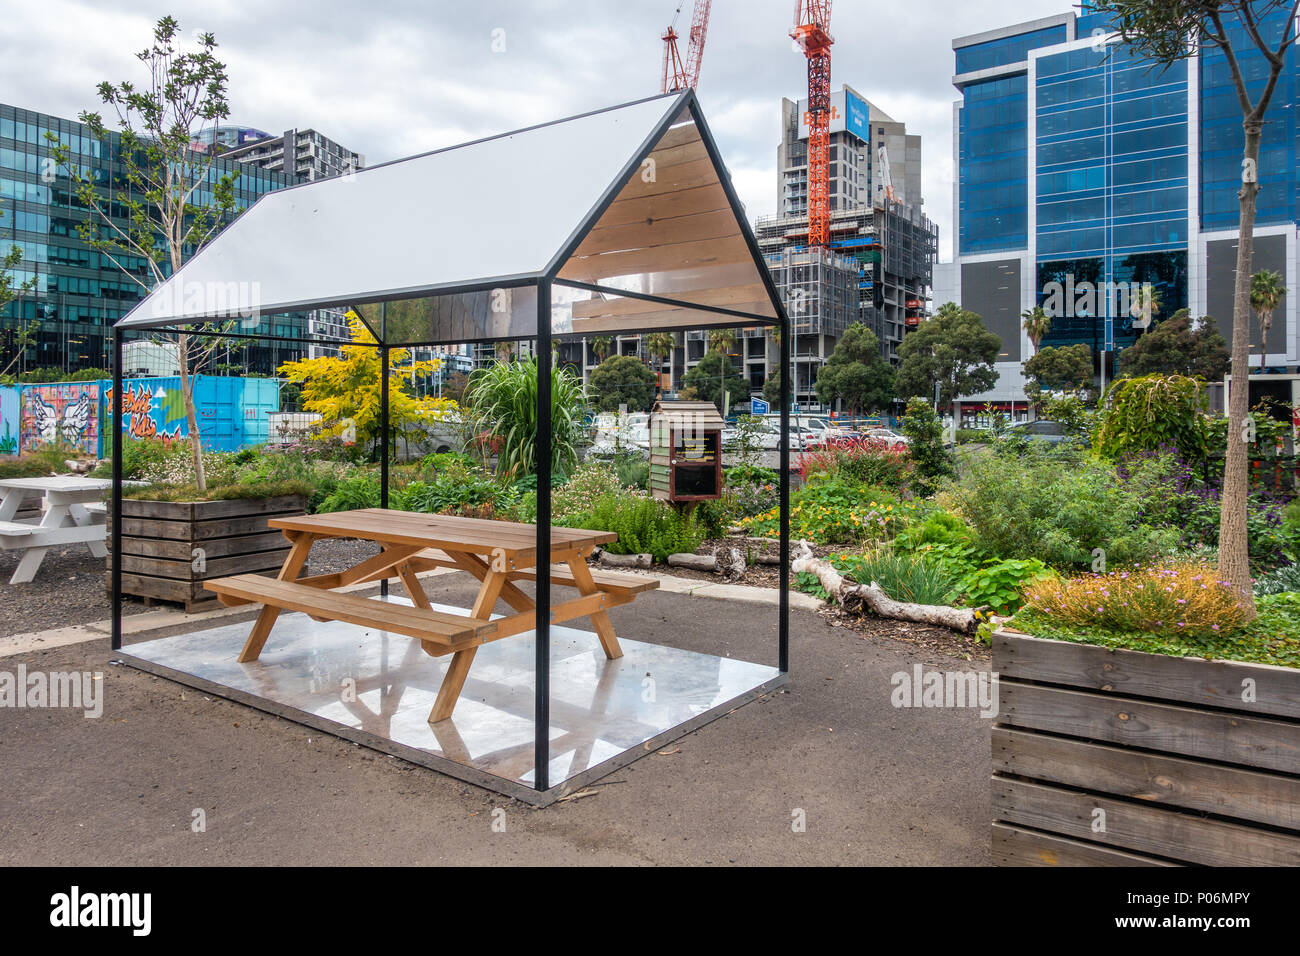 District Docklands Community Gardens surrounded by modern buildings. Melbourne, VIC Australia. The site was formerly an industrial wasteland. Stock Photo